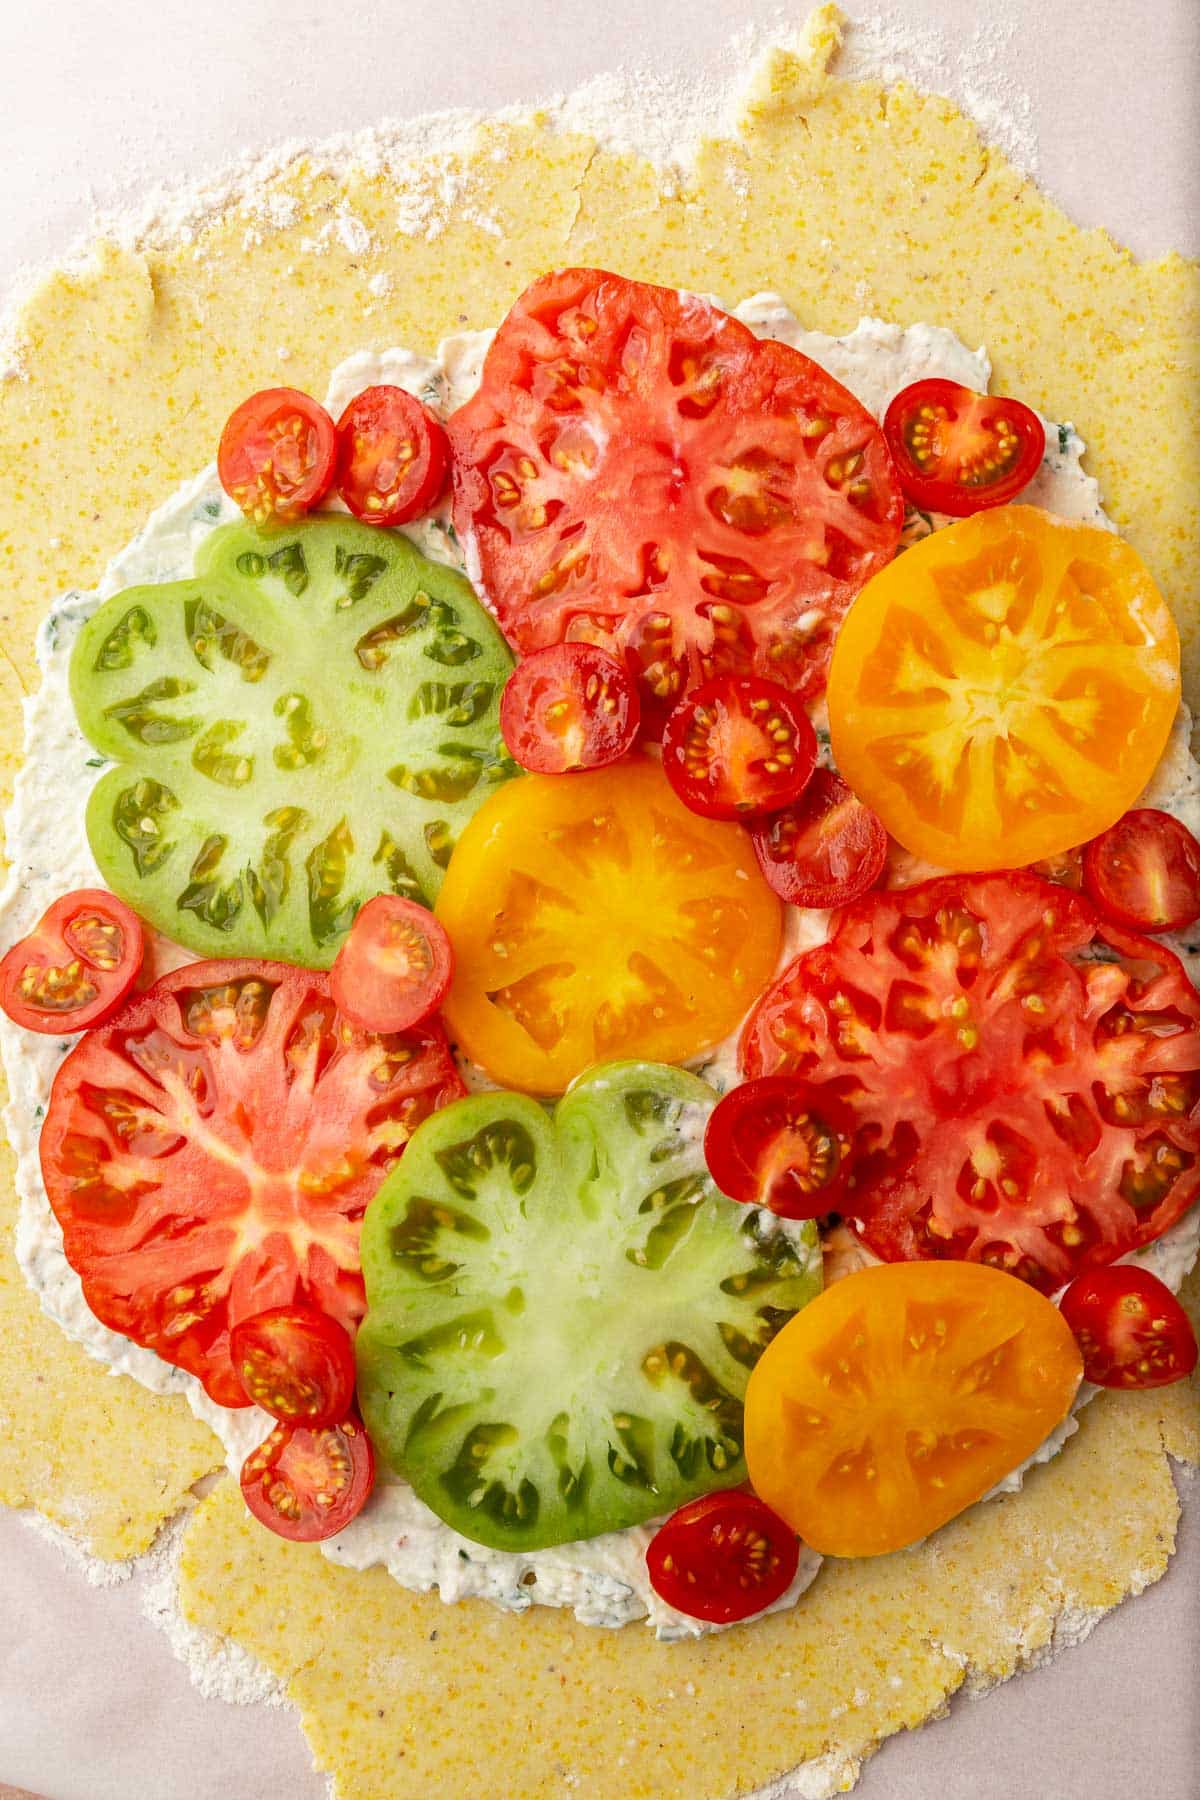 Slices of heirloom tomatoes and cherry tomatoes on a piece of gluten-free tart dough.